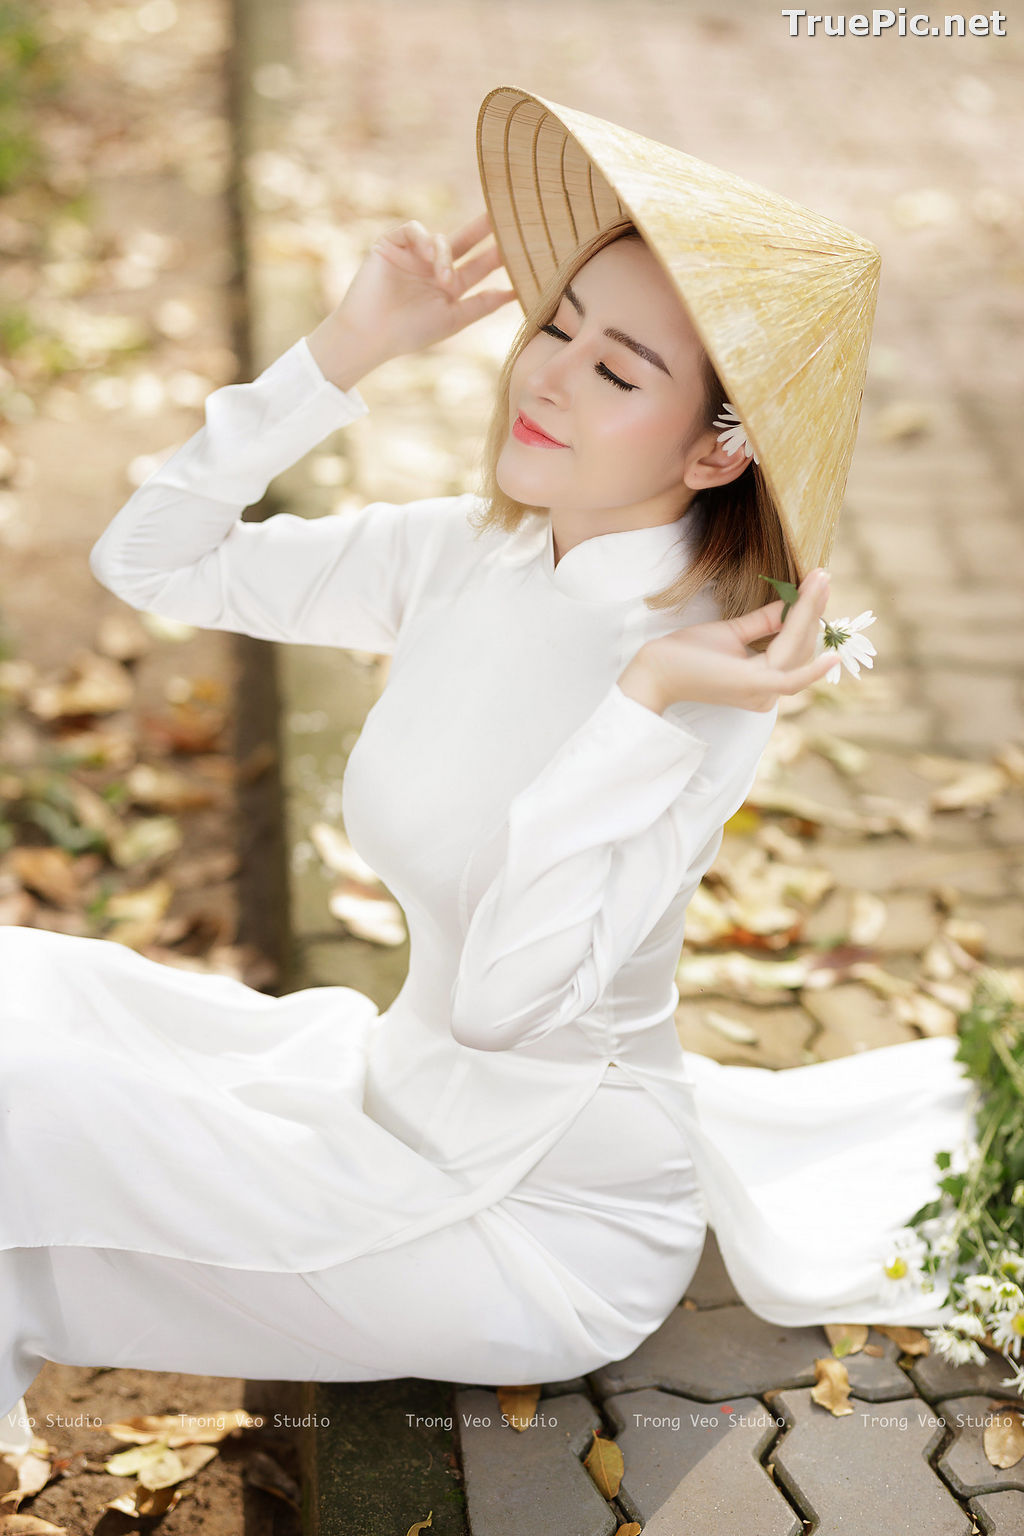 Image The Beauty of Vietnamese Girls with Traditional Dress (Ao Dai) #4 - TruePic.net - Picture-51